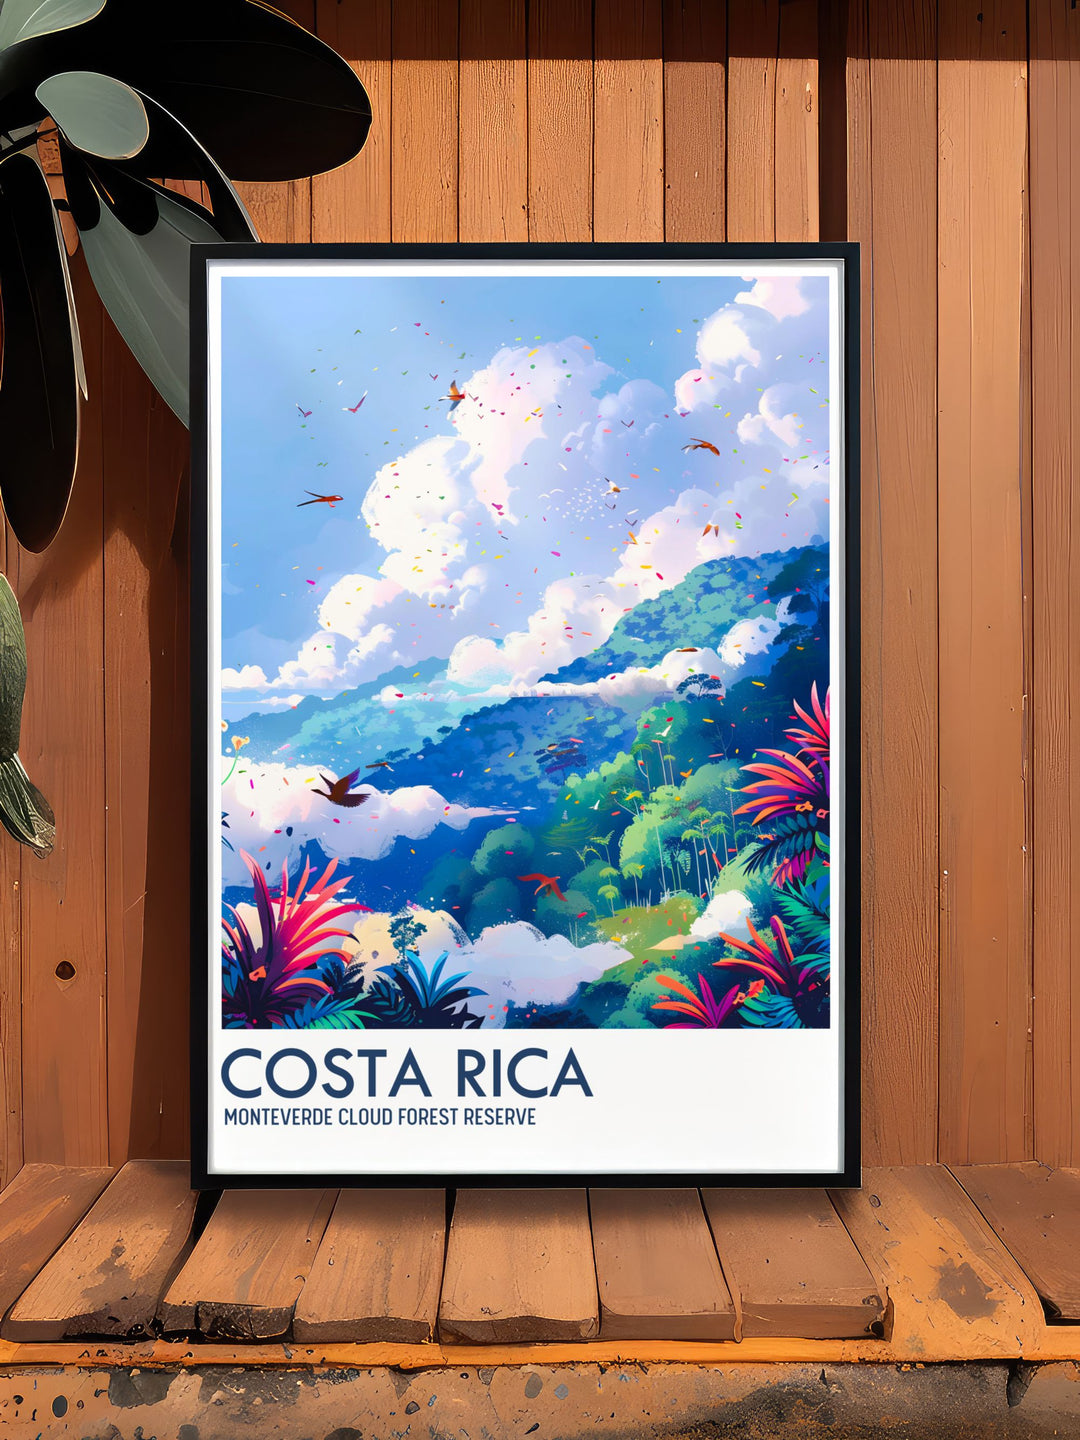 Celebrate the unique flora and fauna of Monteverde Cloud Forest with this detailed travel poster. Featuring the reserves lush greenery and diverse wildlife, this high quality art print is ideal for bringing a piece of Costa Ricas natural wonder into your home. Perfect for nature lovers and adventure seekers.